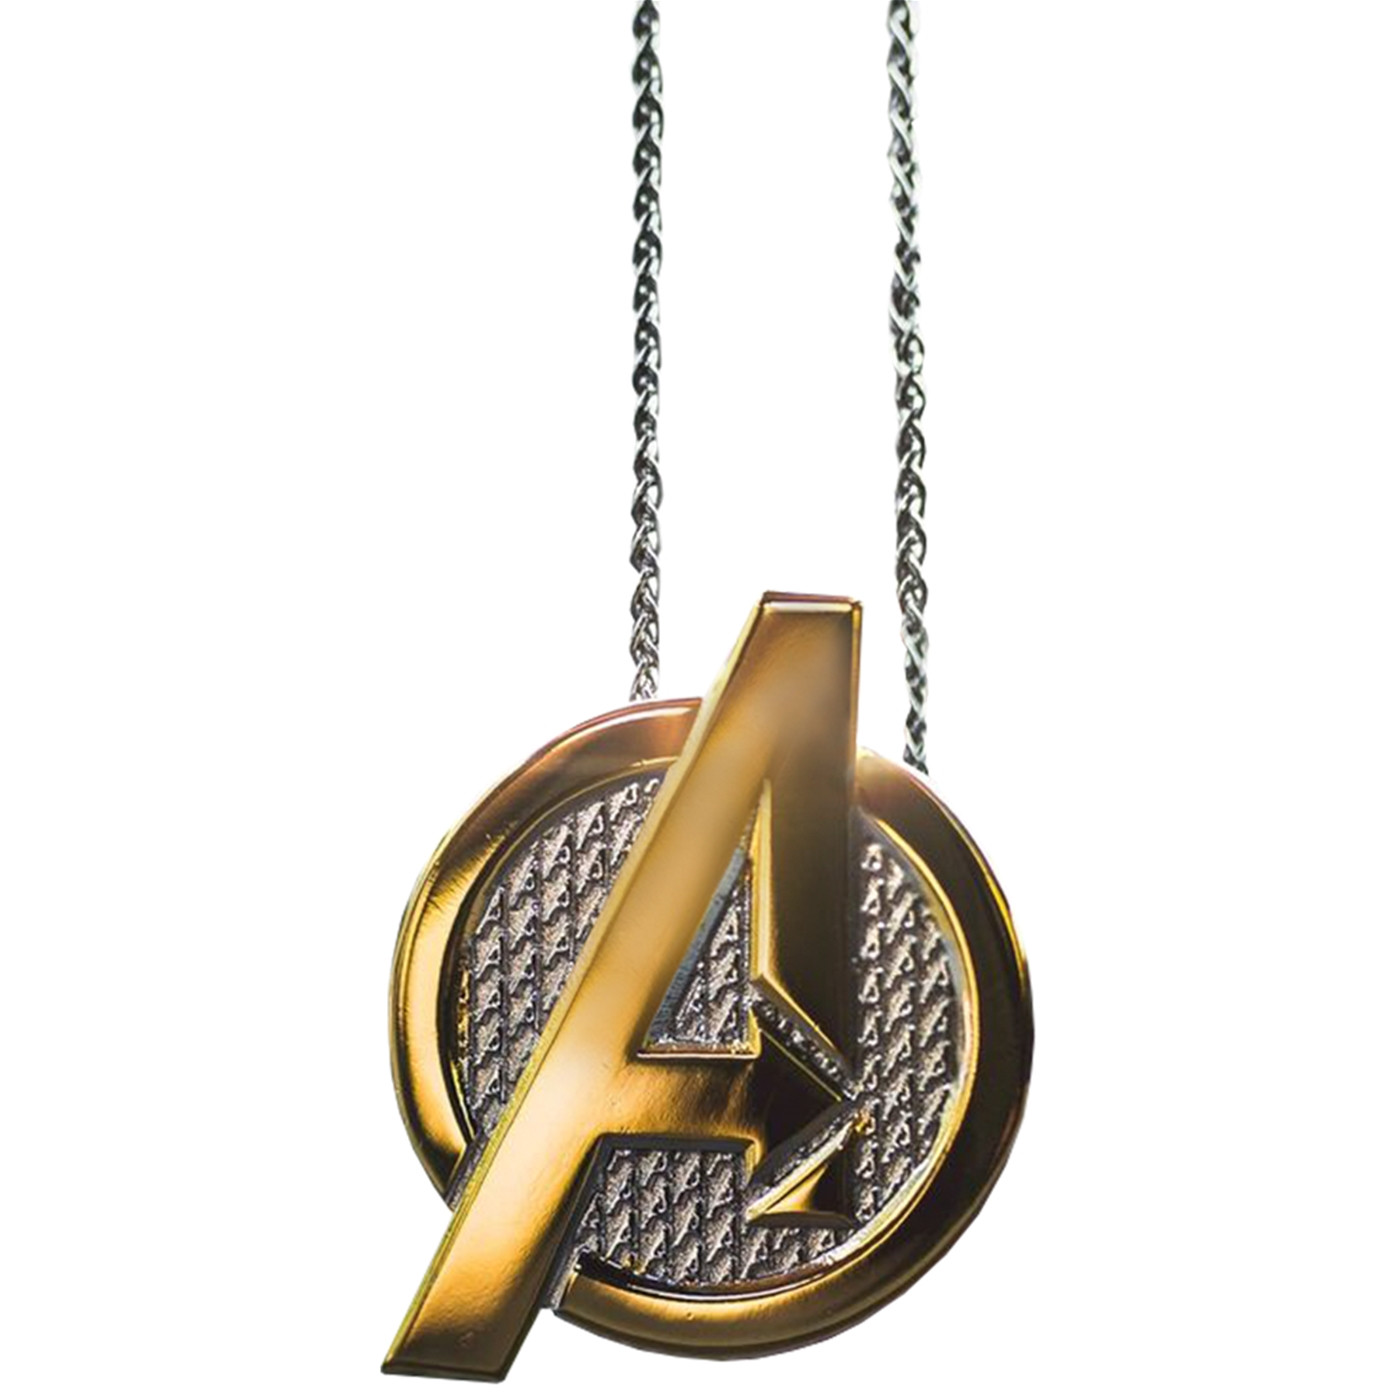 Avengers Logo Necklace with Chain